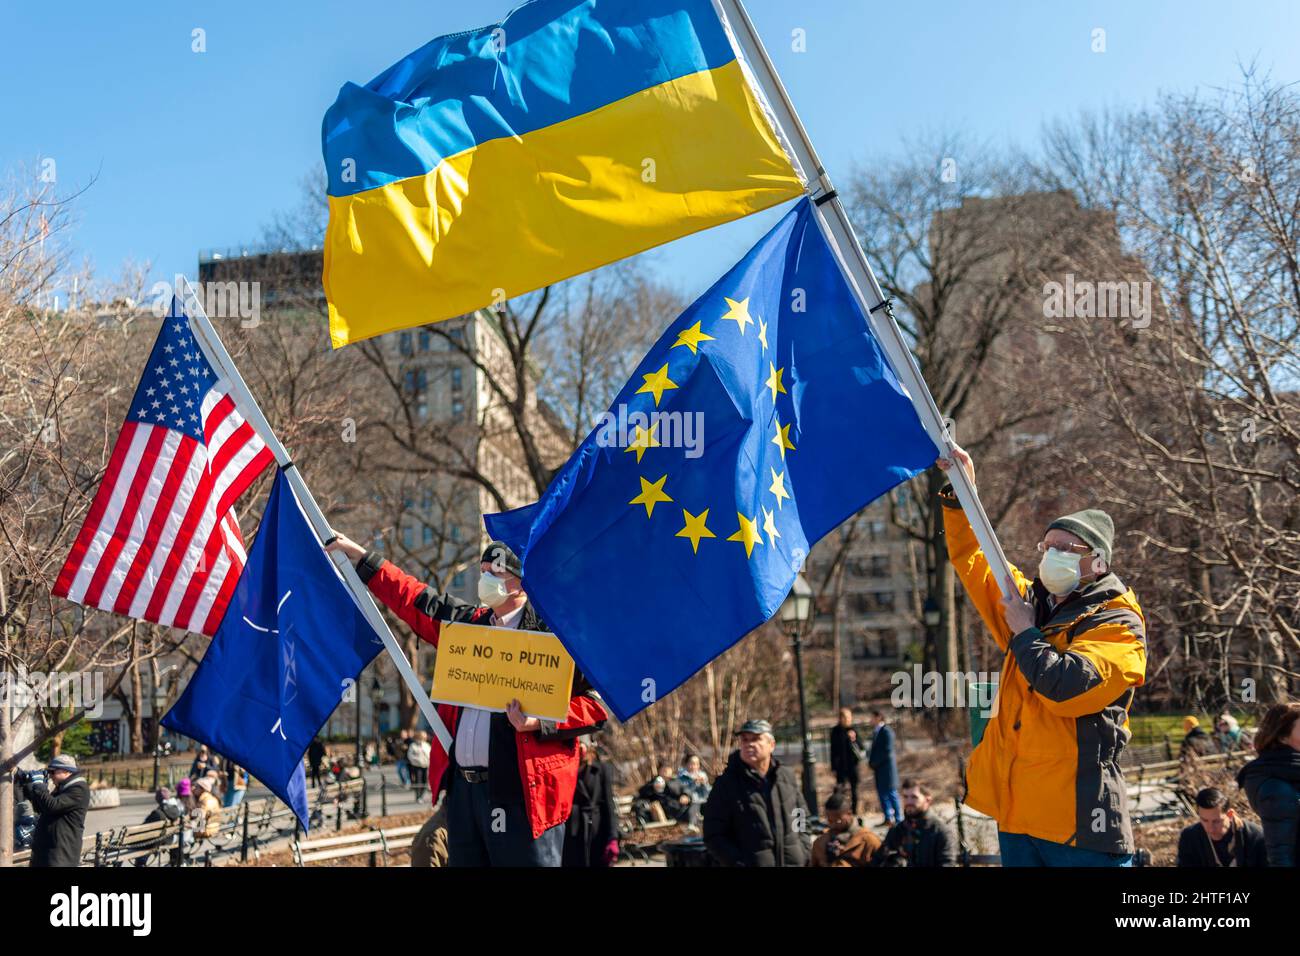 Ukrainian-Americans and their supporters protest the Russian invasion and show support for the citizens of the Ukraine, in Washington Square Park in New York on Sunday, February 27, 2022. (© Richard B. Levine) Stock Photo